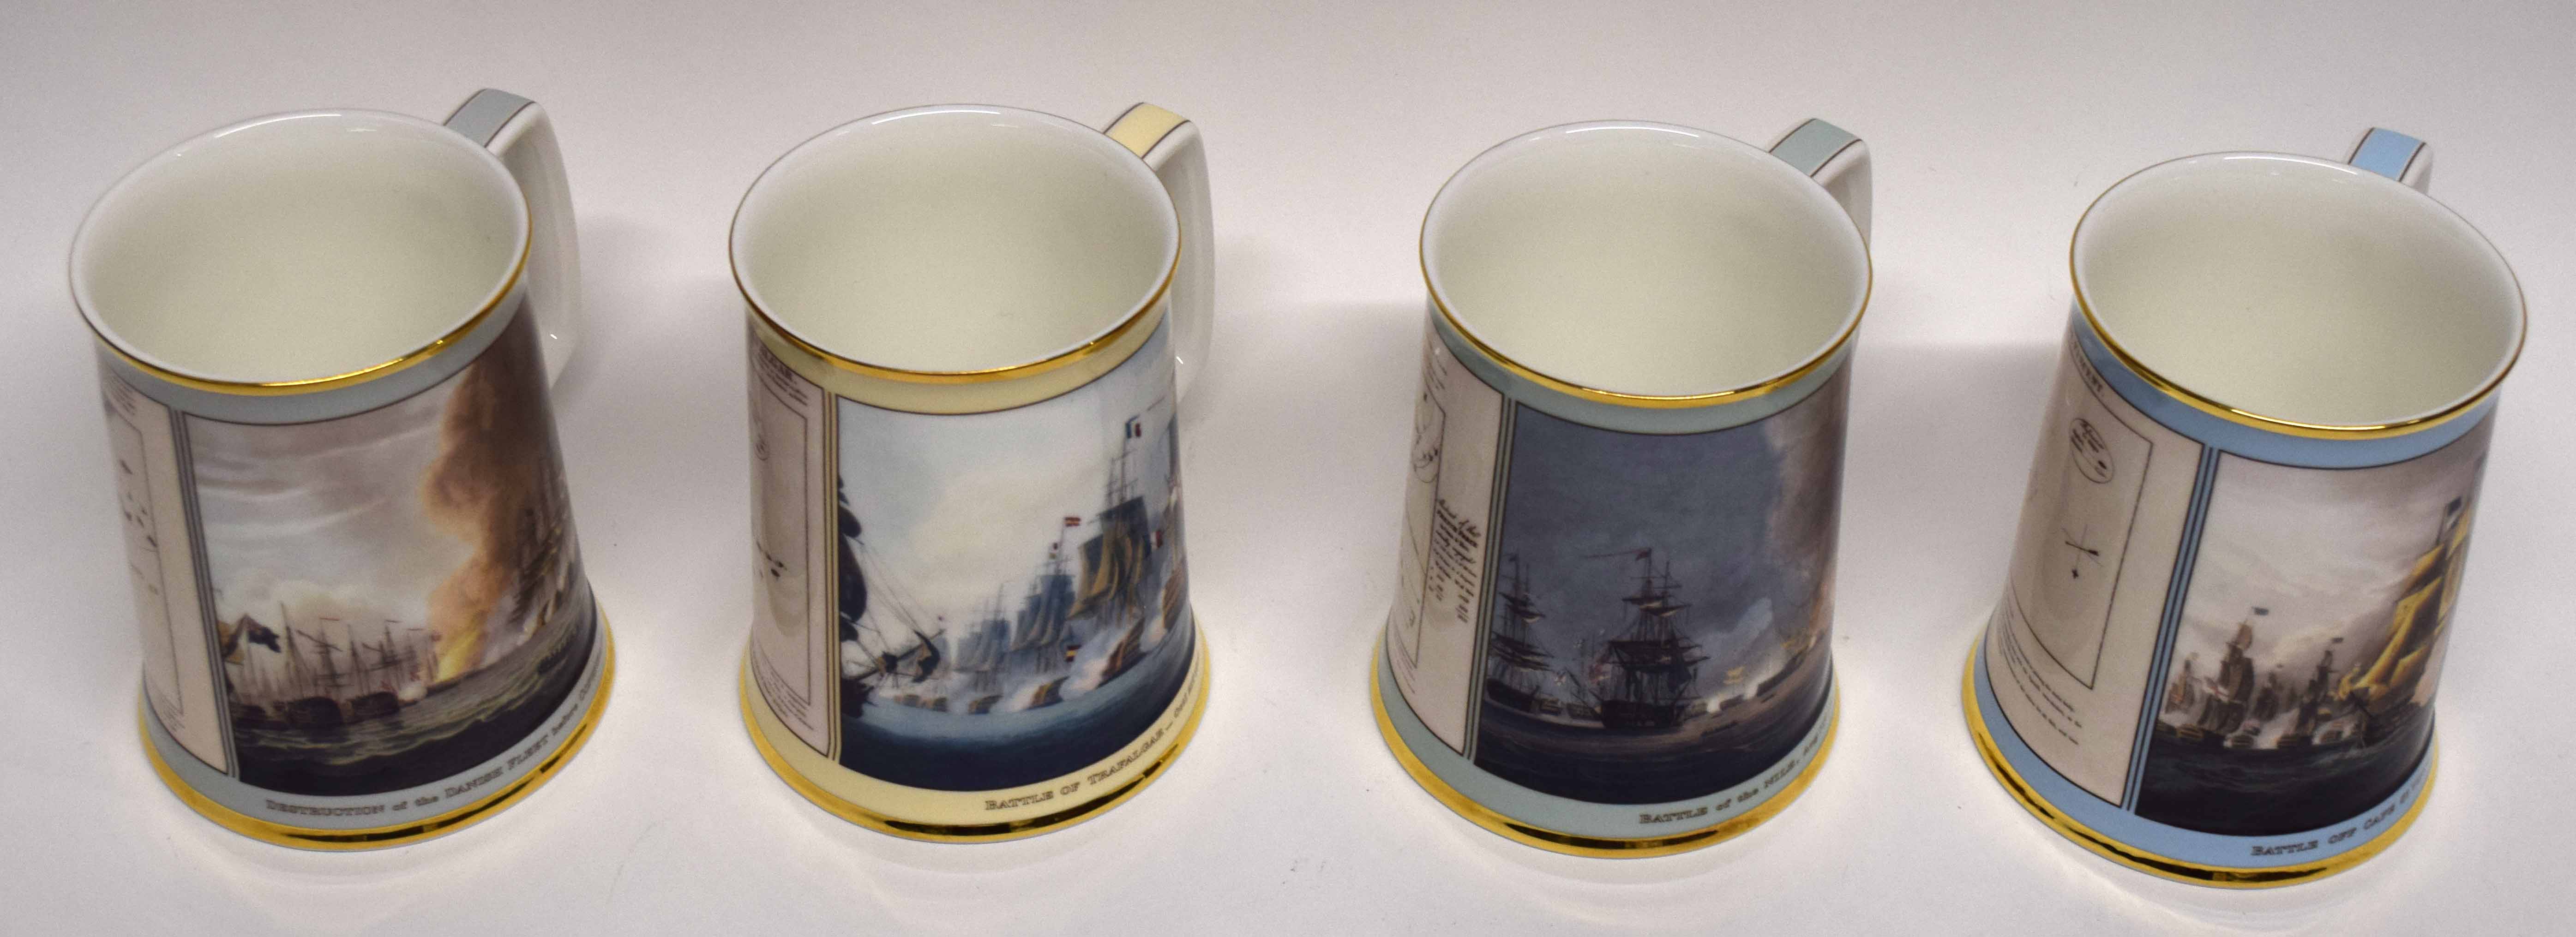 Group of four Nelson commemorative mugs produced by Royal Doulton in a limited edition of 2500,